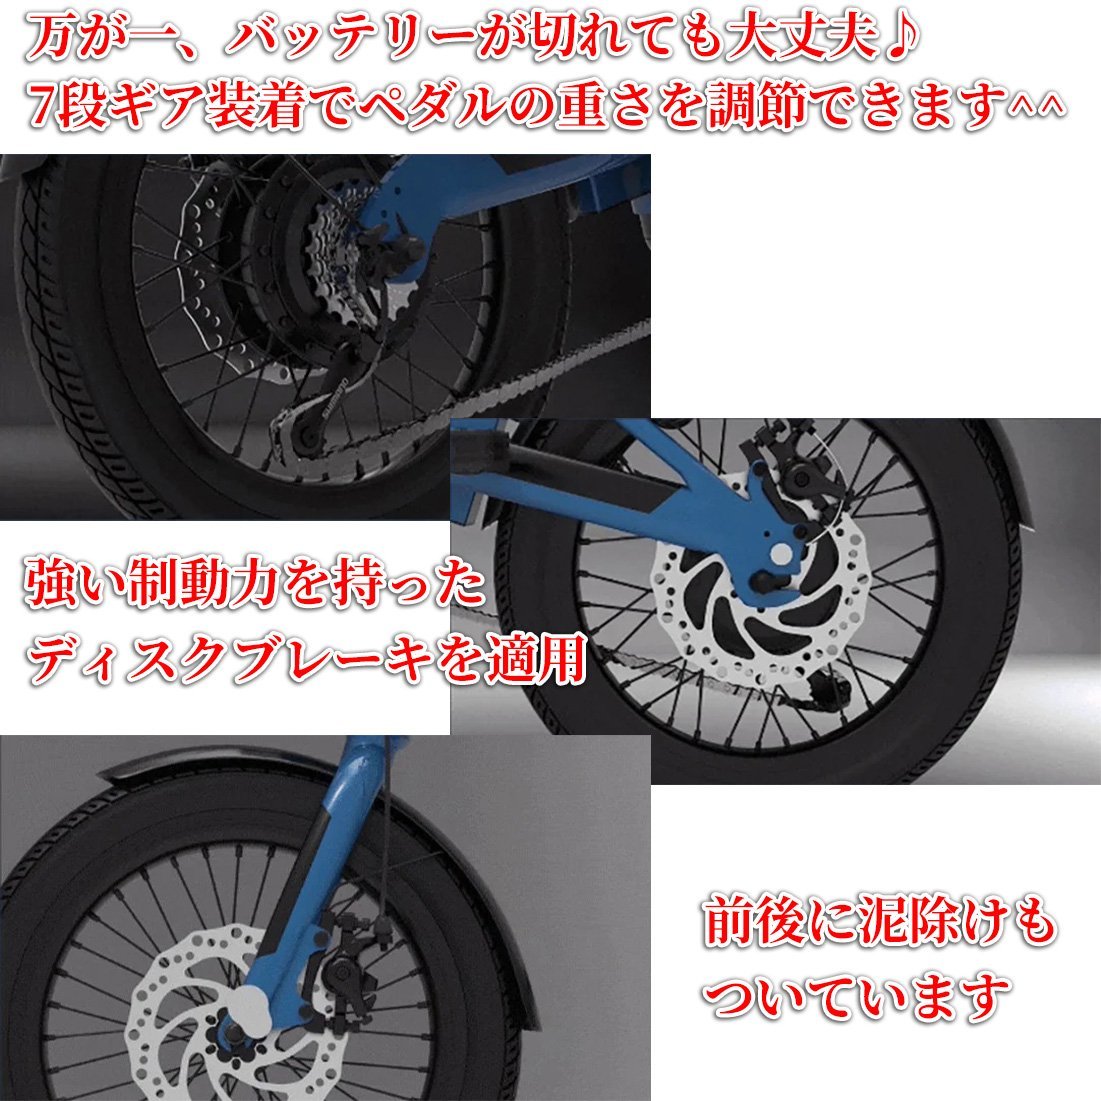 1 times. charge .100km. mileage . possibility! folding possible electric bike STORM gray 